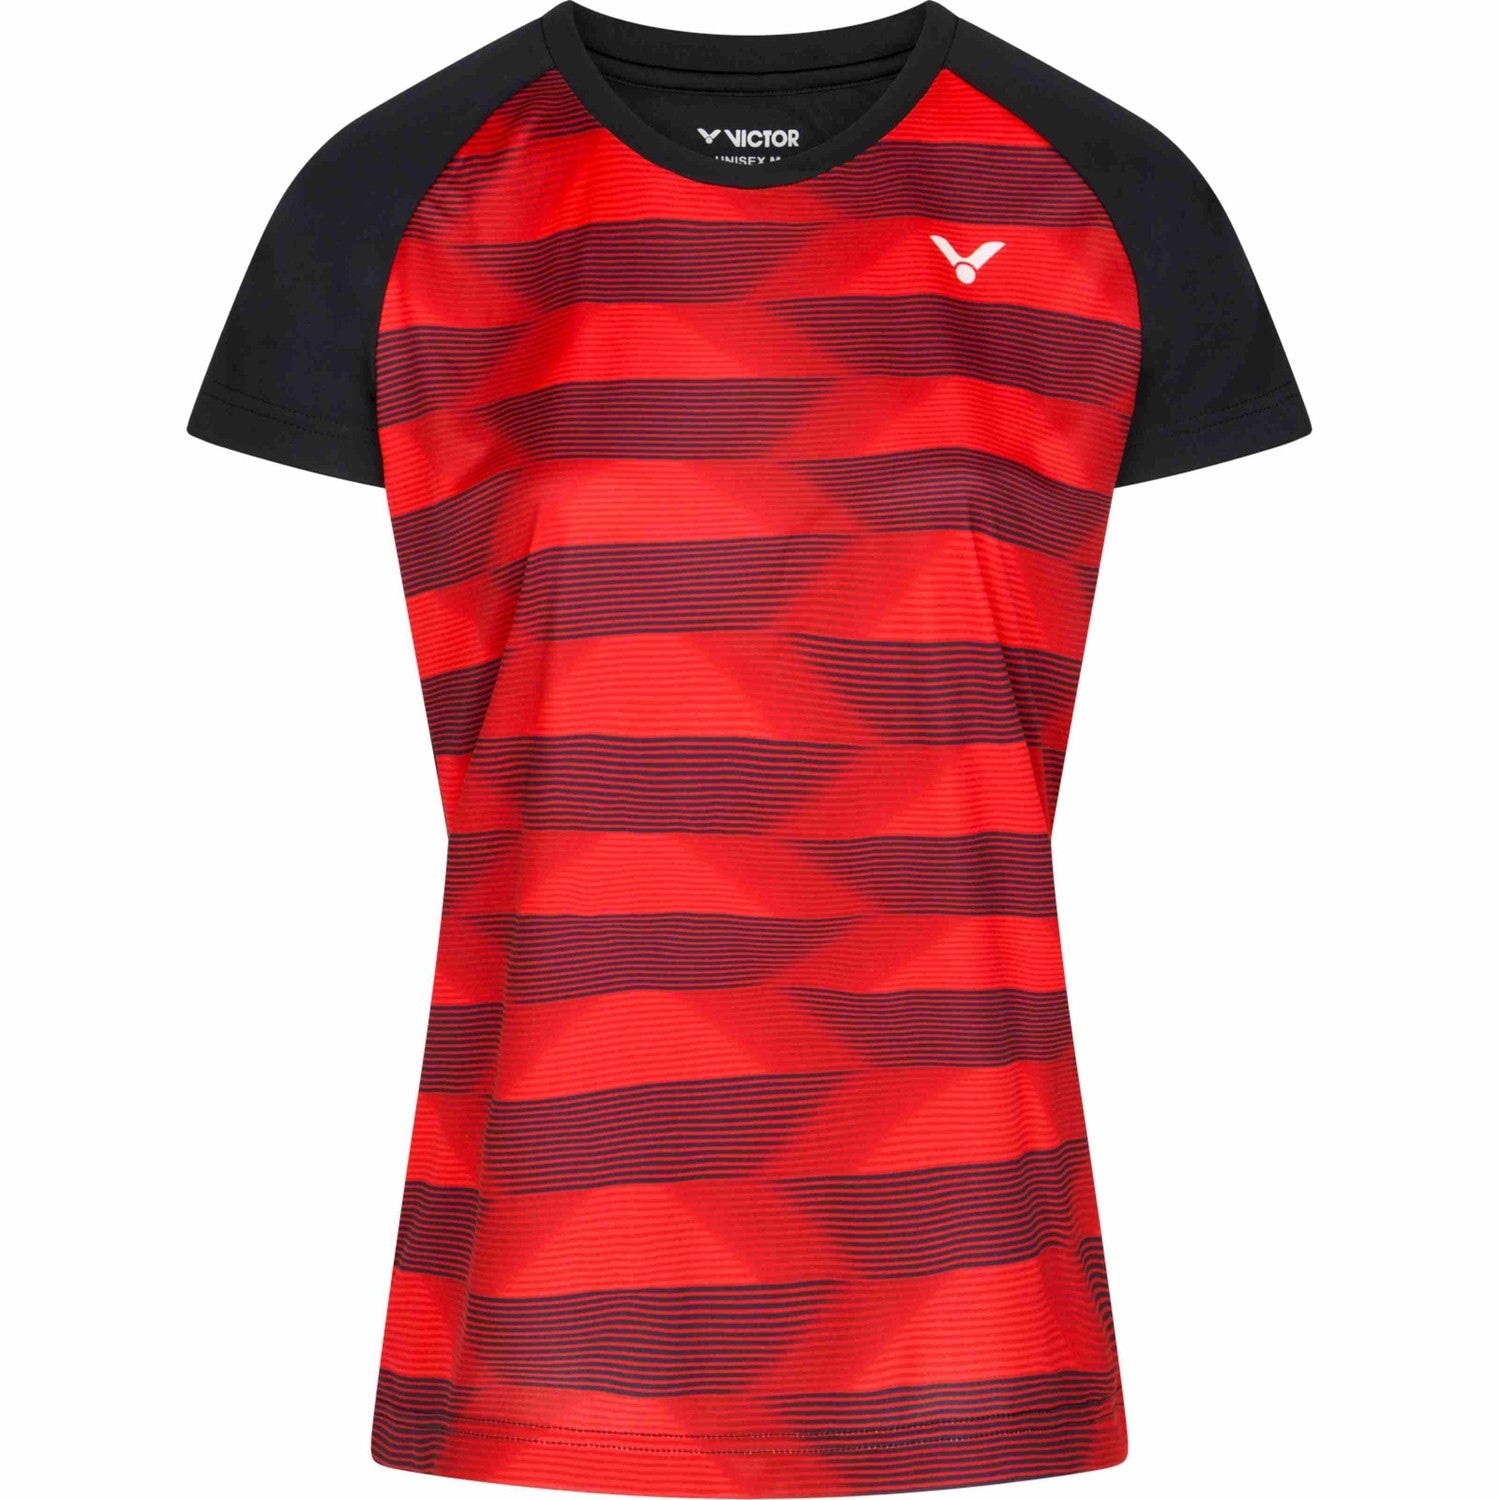 VICTOR T-shirt T-34102 Womens (Black/Red)